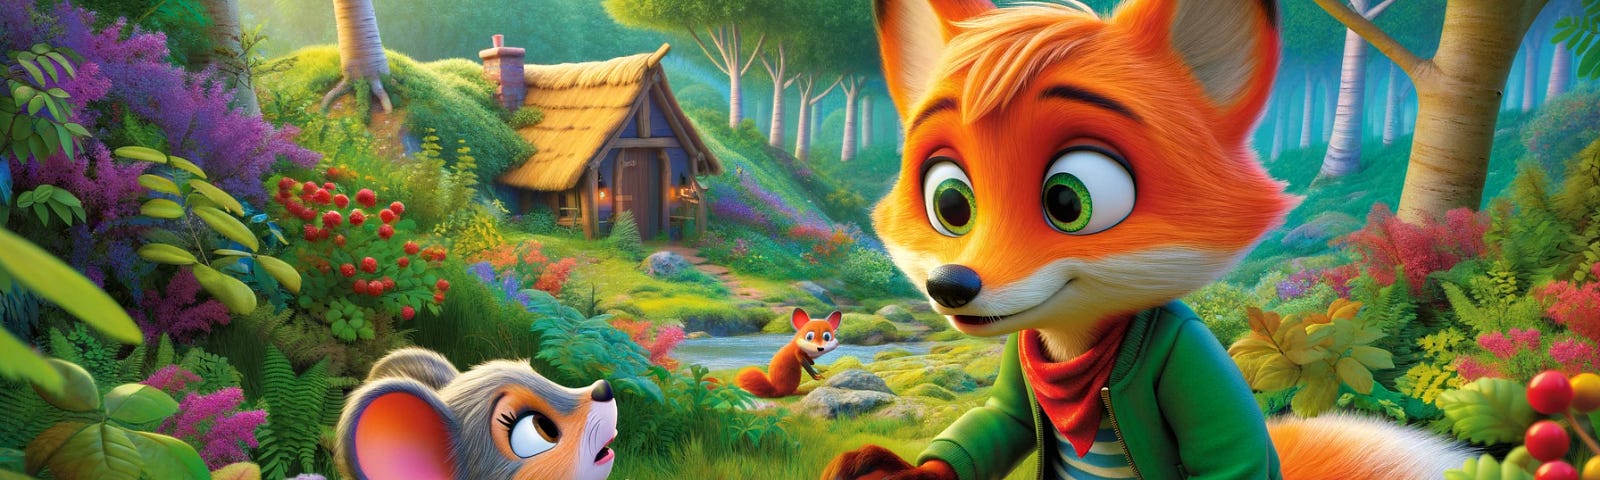 Small fox helping a mouse , animated